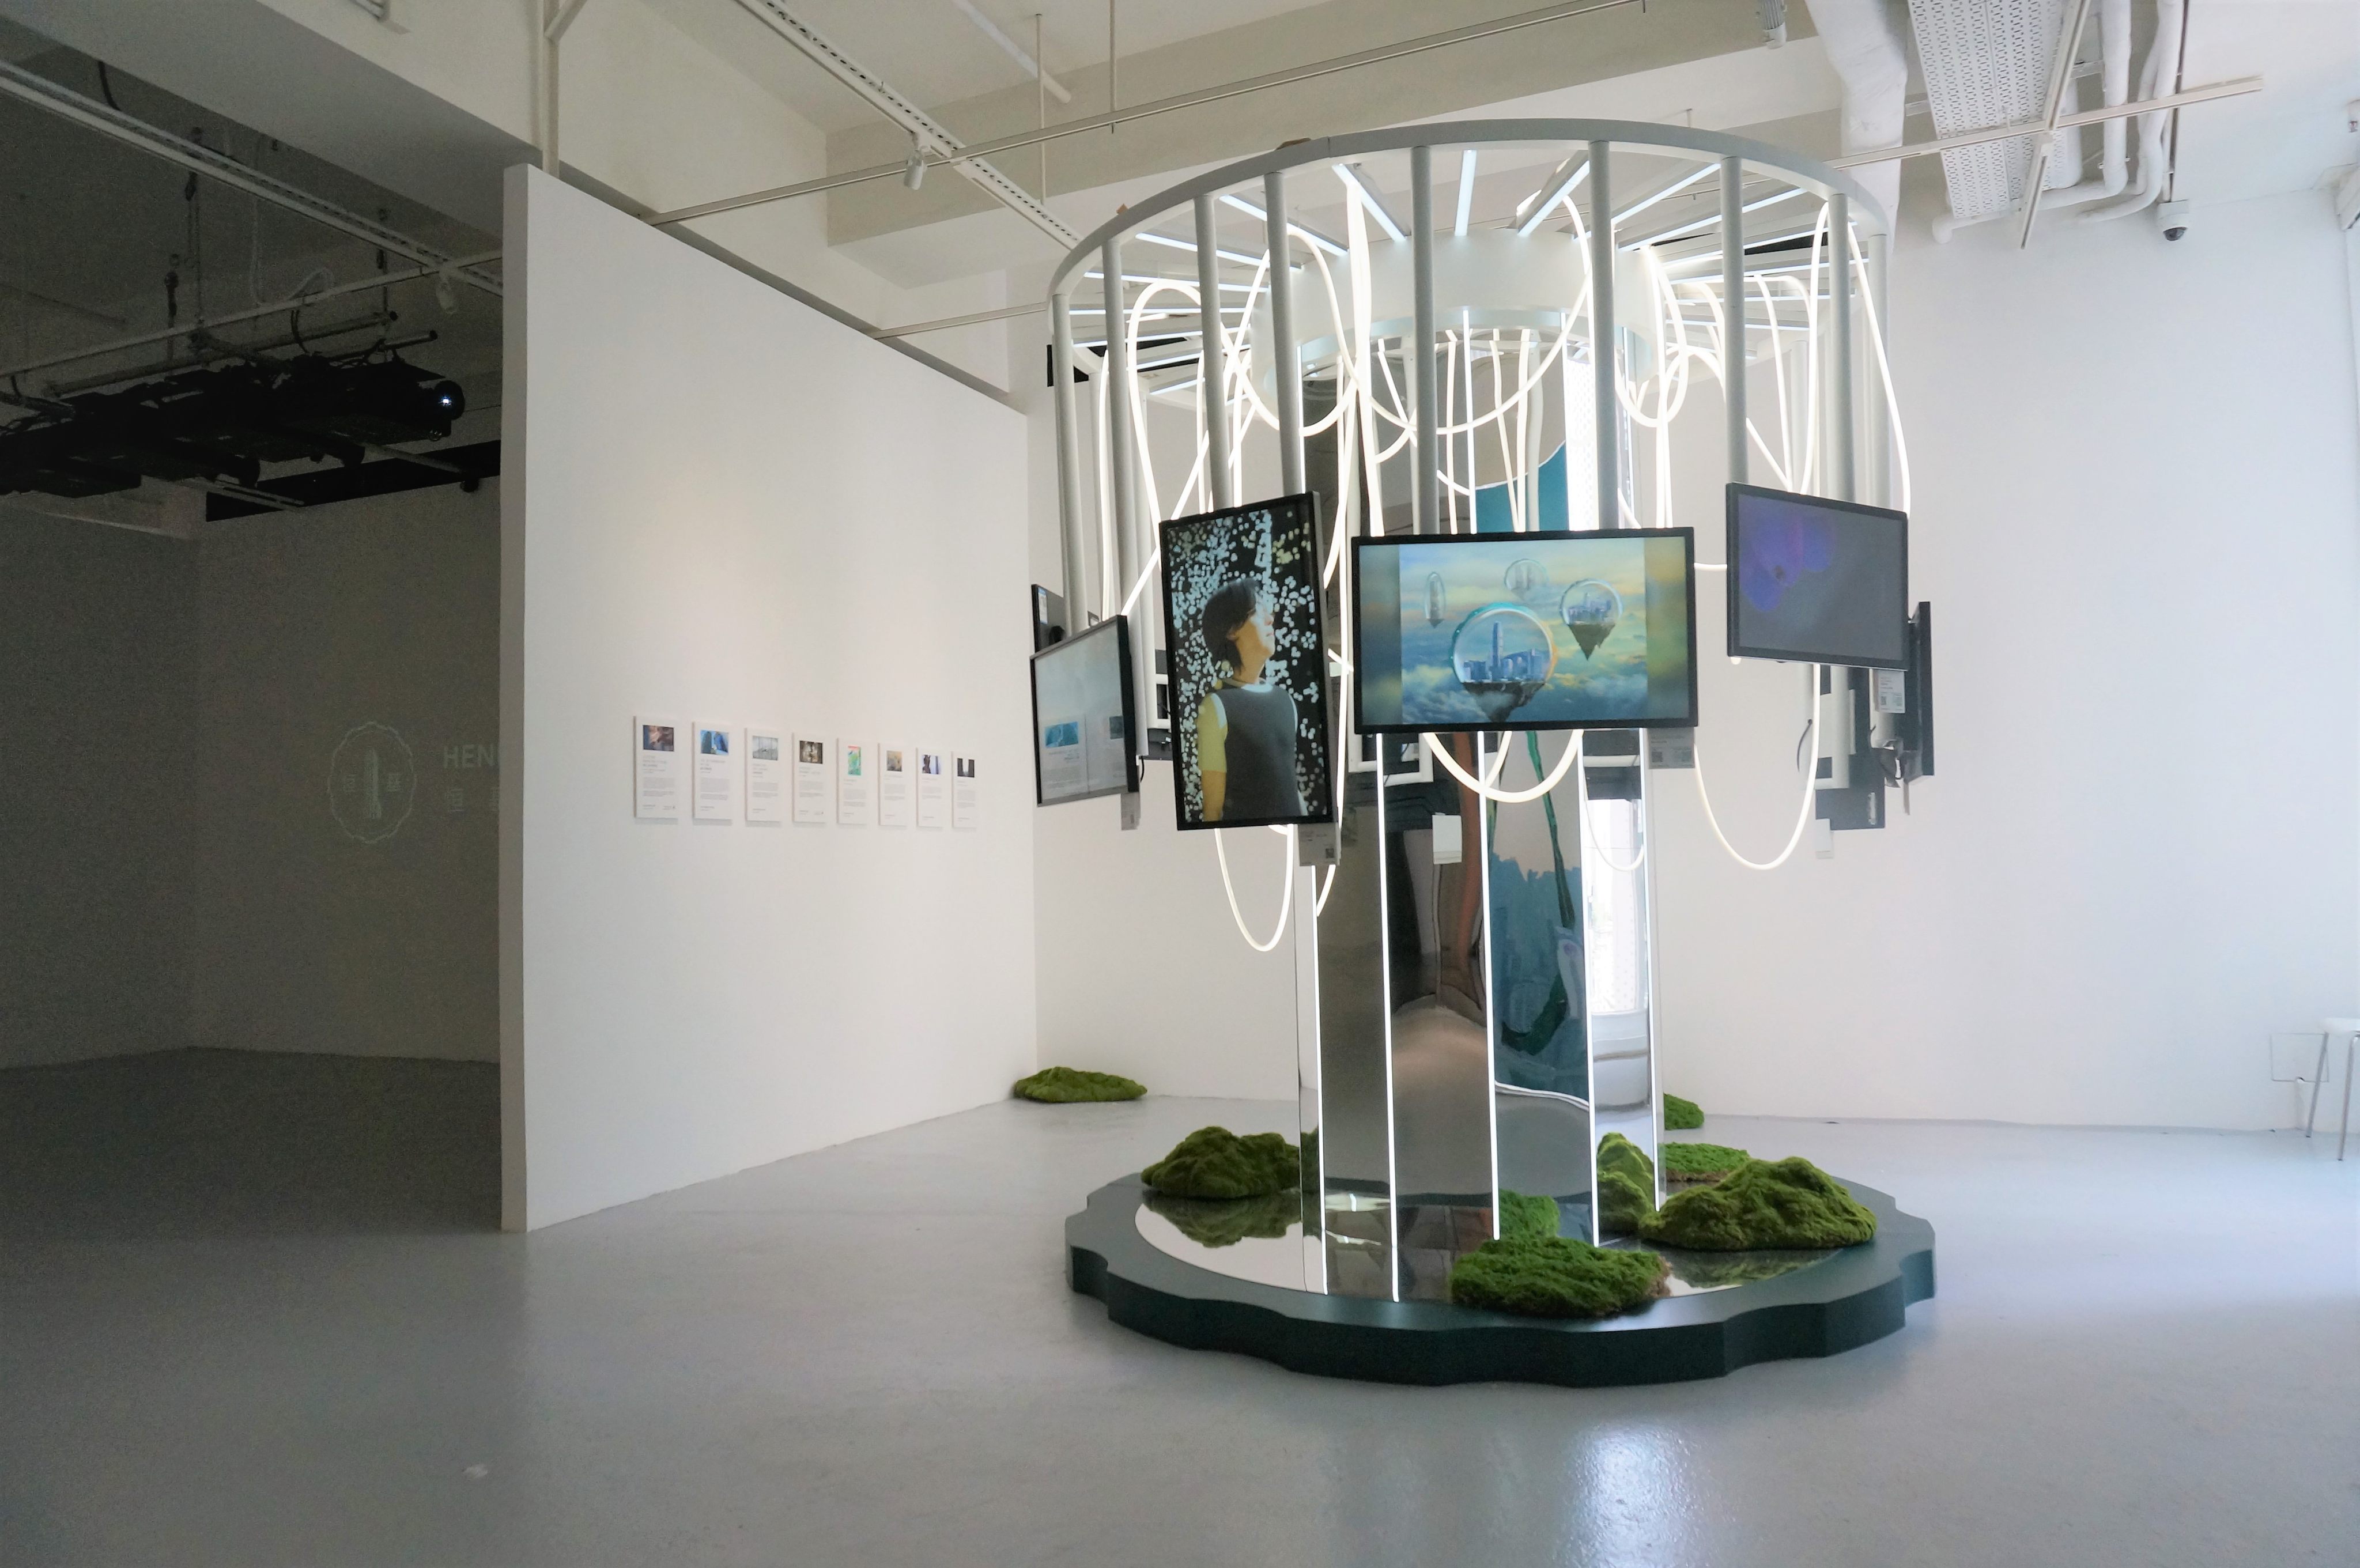 The exhibition “Realising Your Imagination” at H Queen’s. Photo: Hazel Luo